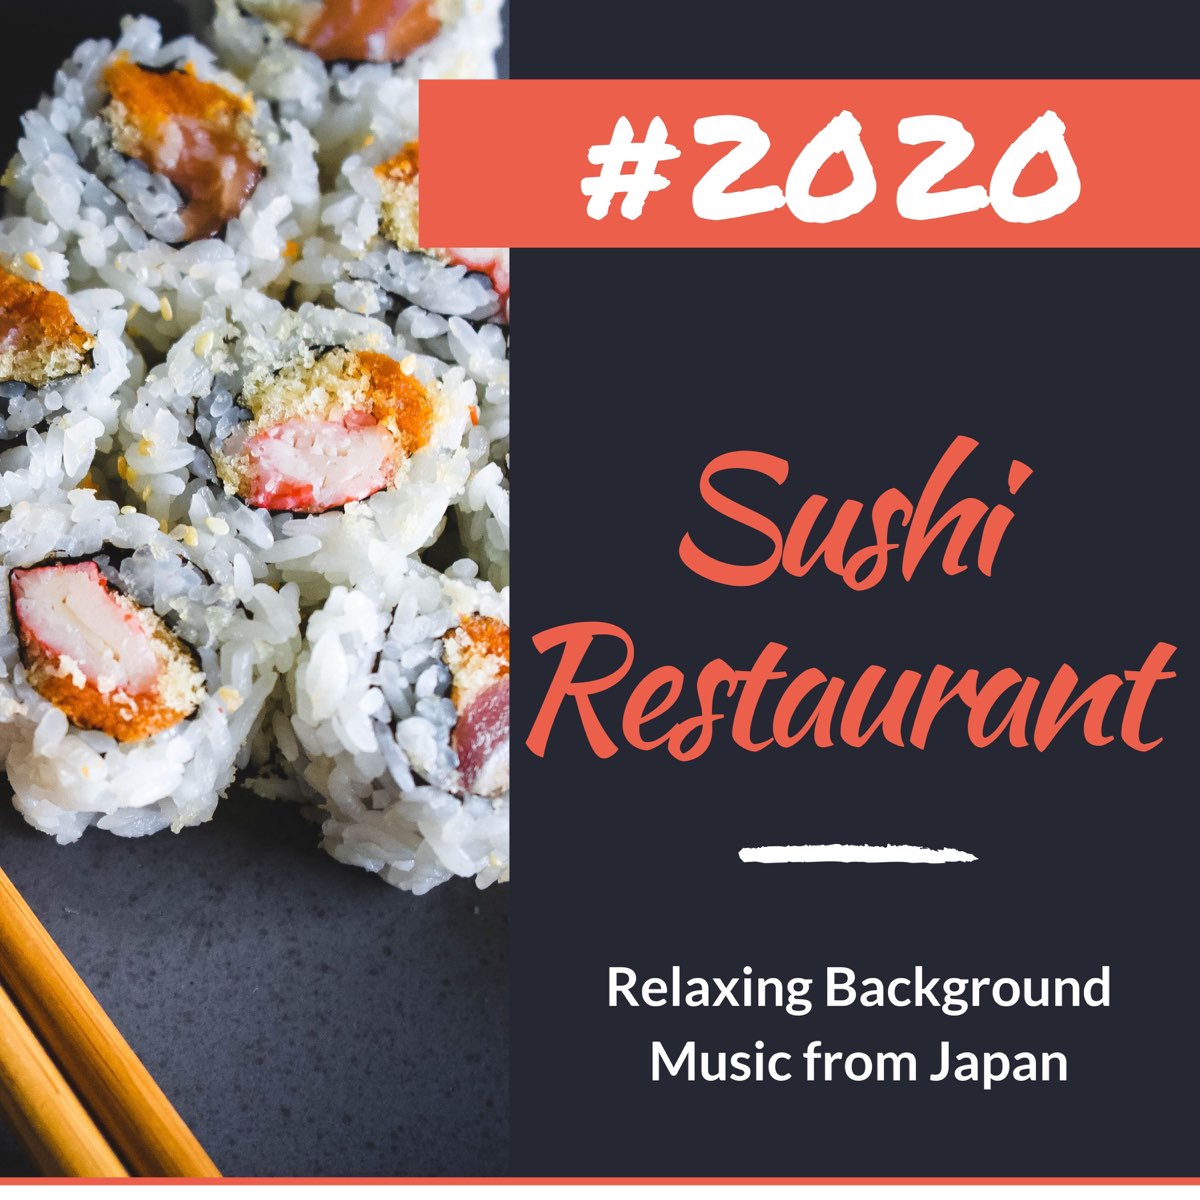 2020 Sushi Restaurant: Relaxing Background Music from Japan by Hayashi Fusa  on Apple Music